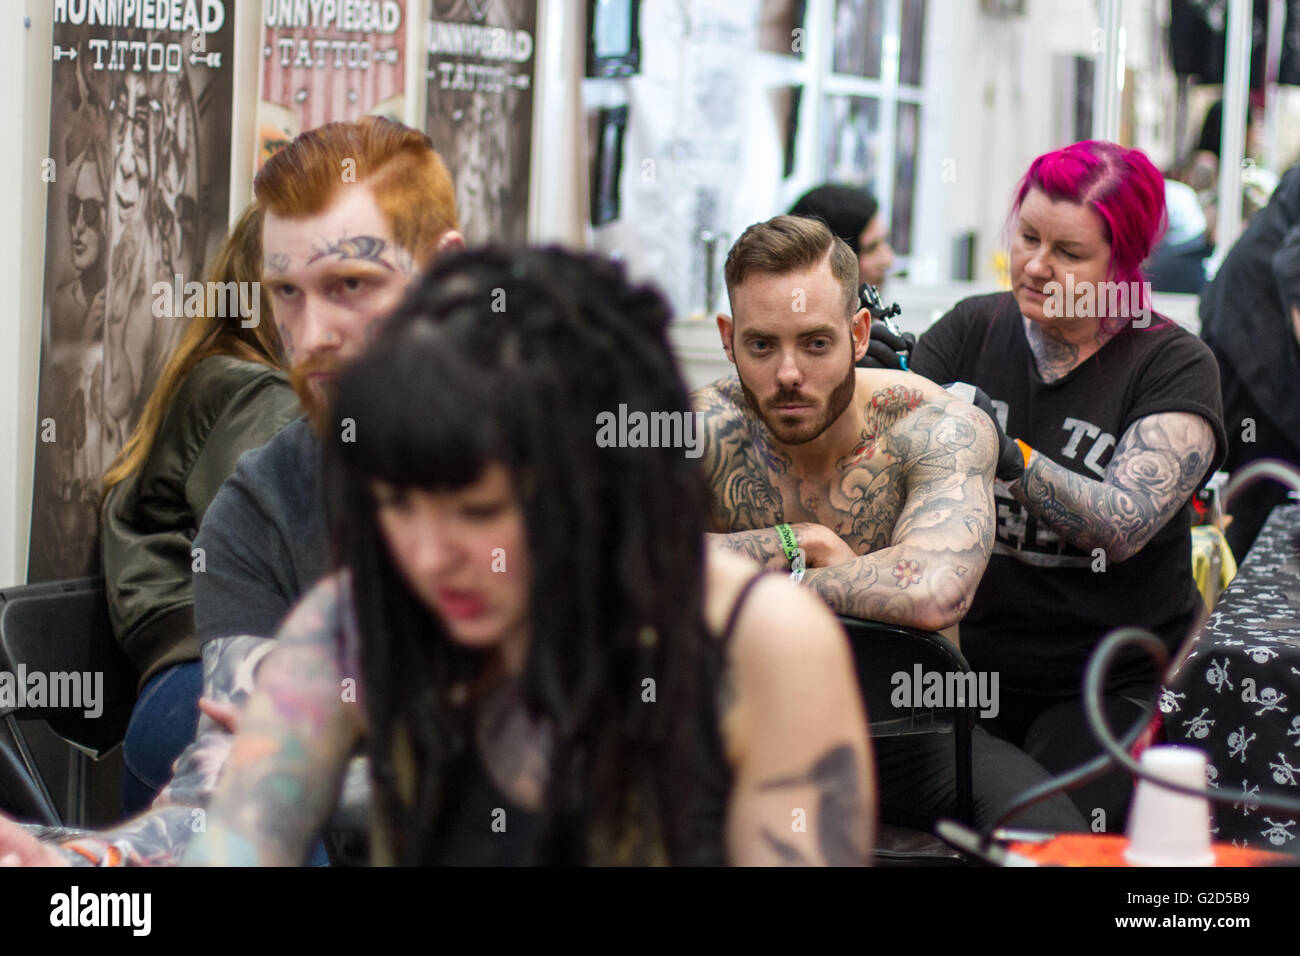 London, UK  28th May, 2016. The Great British Tattoo Show at  Alexandra Palace, London, UK. The show features over 320 tattoo artists as well as alternative fashion shows and stage acts.  Copyright Carol Moir/Alamy Live News. Stock Photo